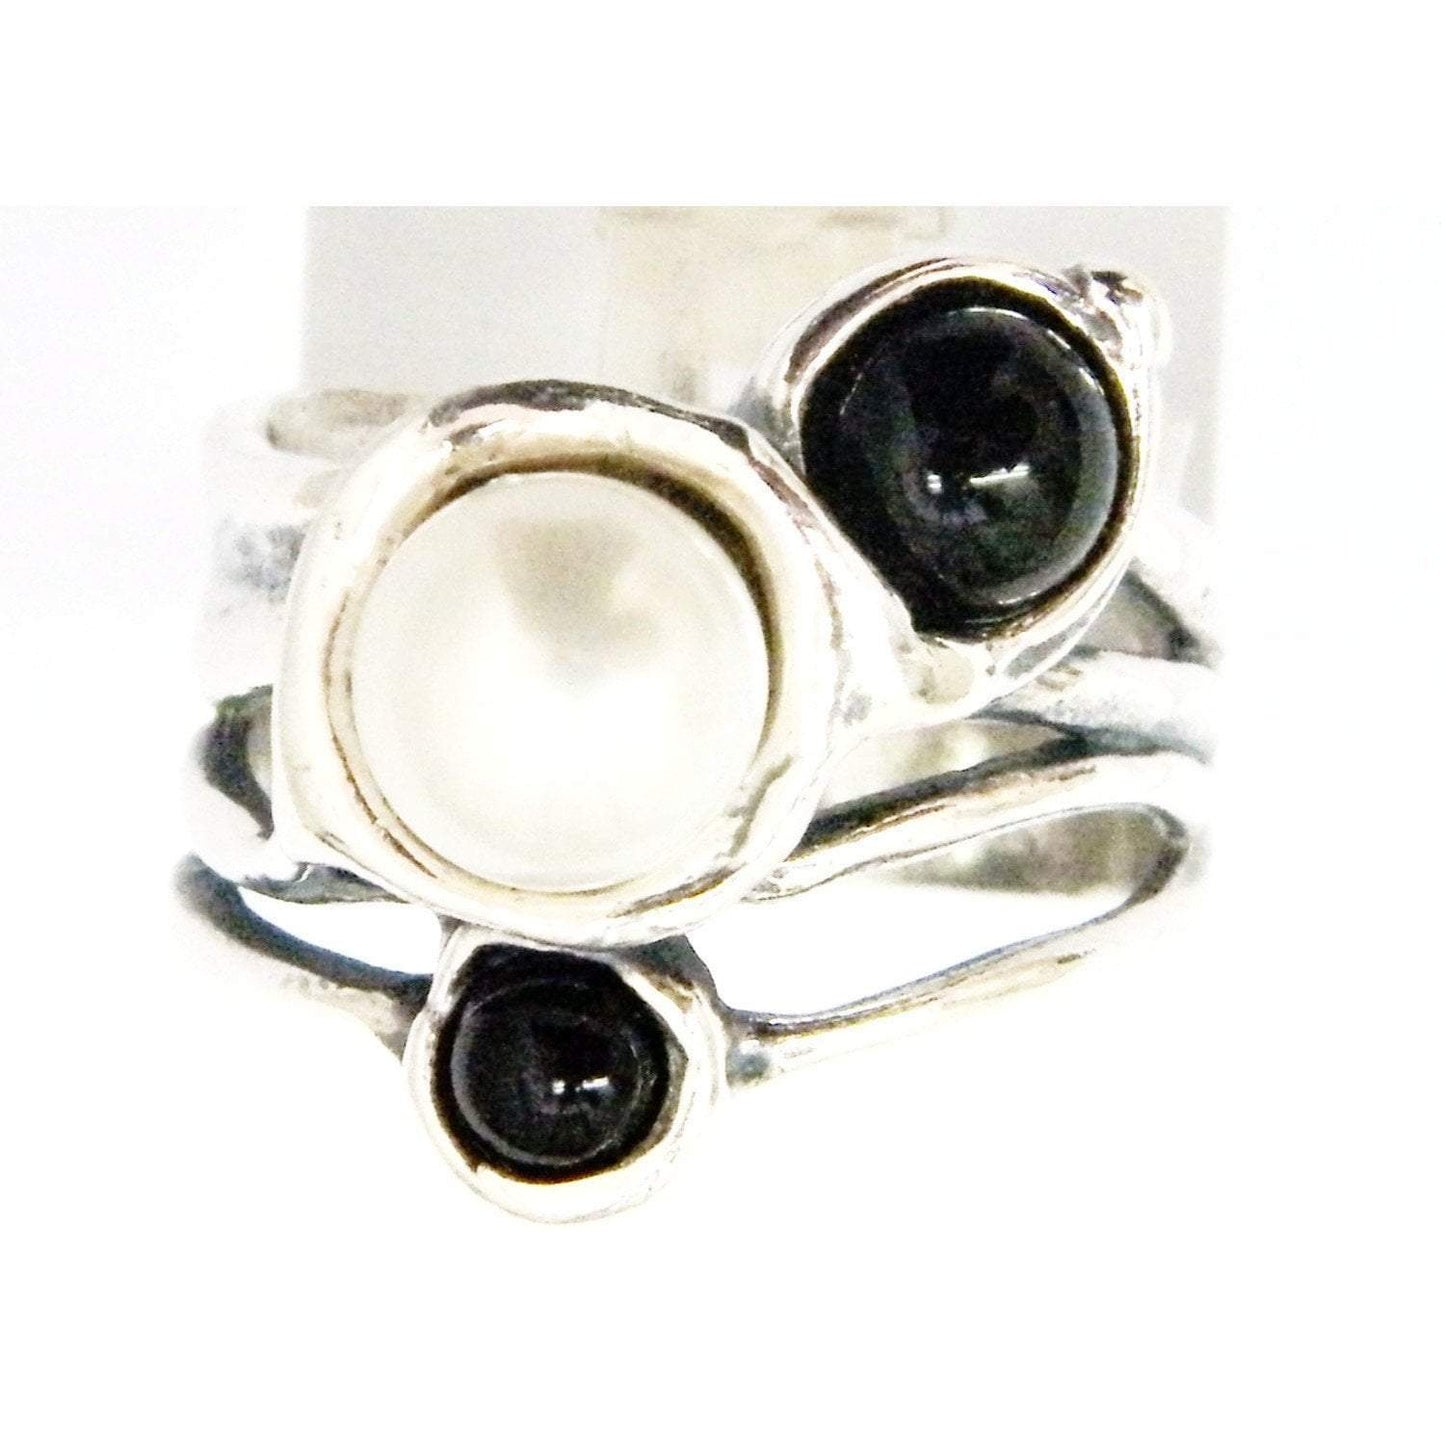 Bluenoemi Jewelry Rings 6.5 / silver Special Offer size 6.5 Sterling silver ring set with onyx and pearls.